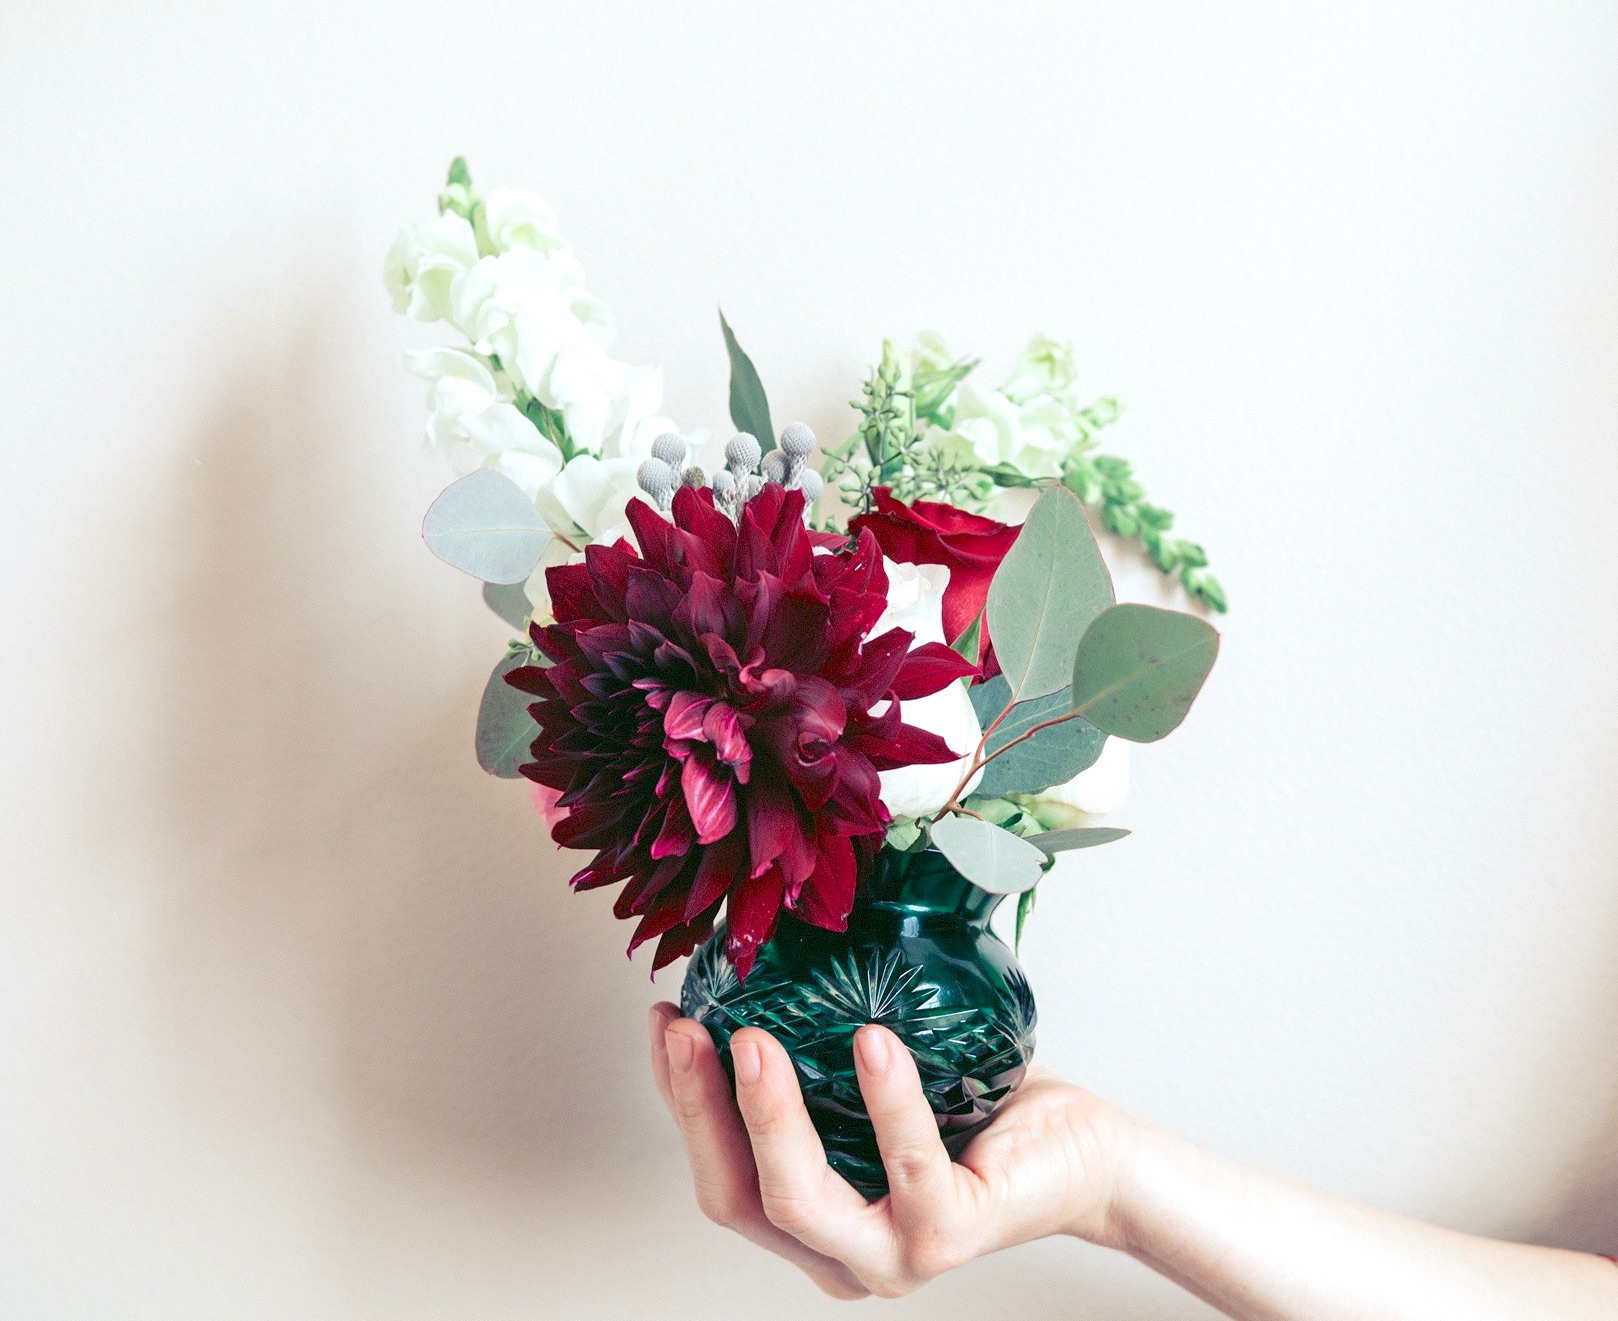 Decide how much floral design work you want to make room for in your side hustle